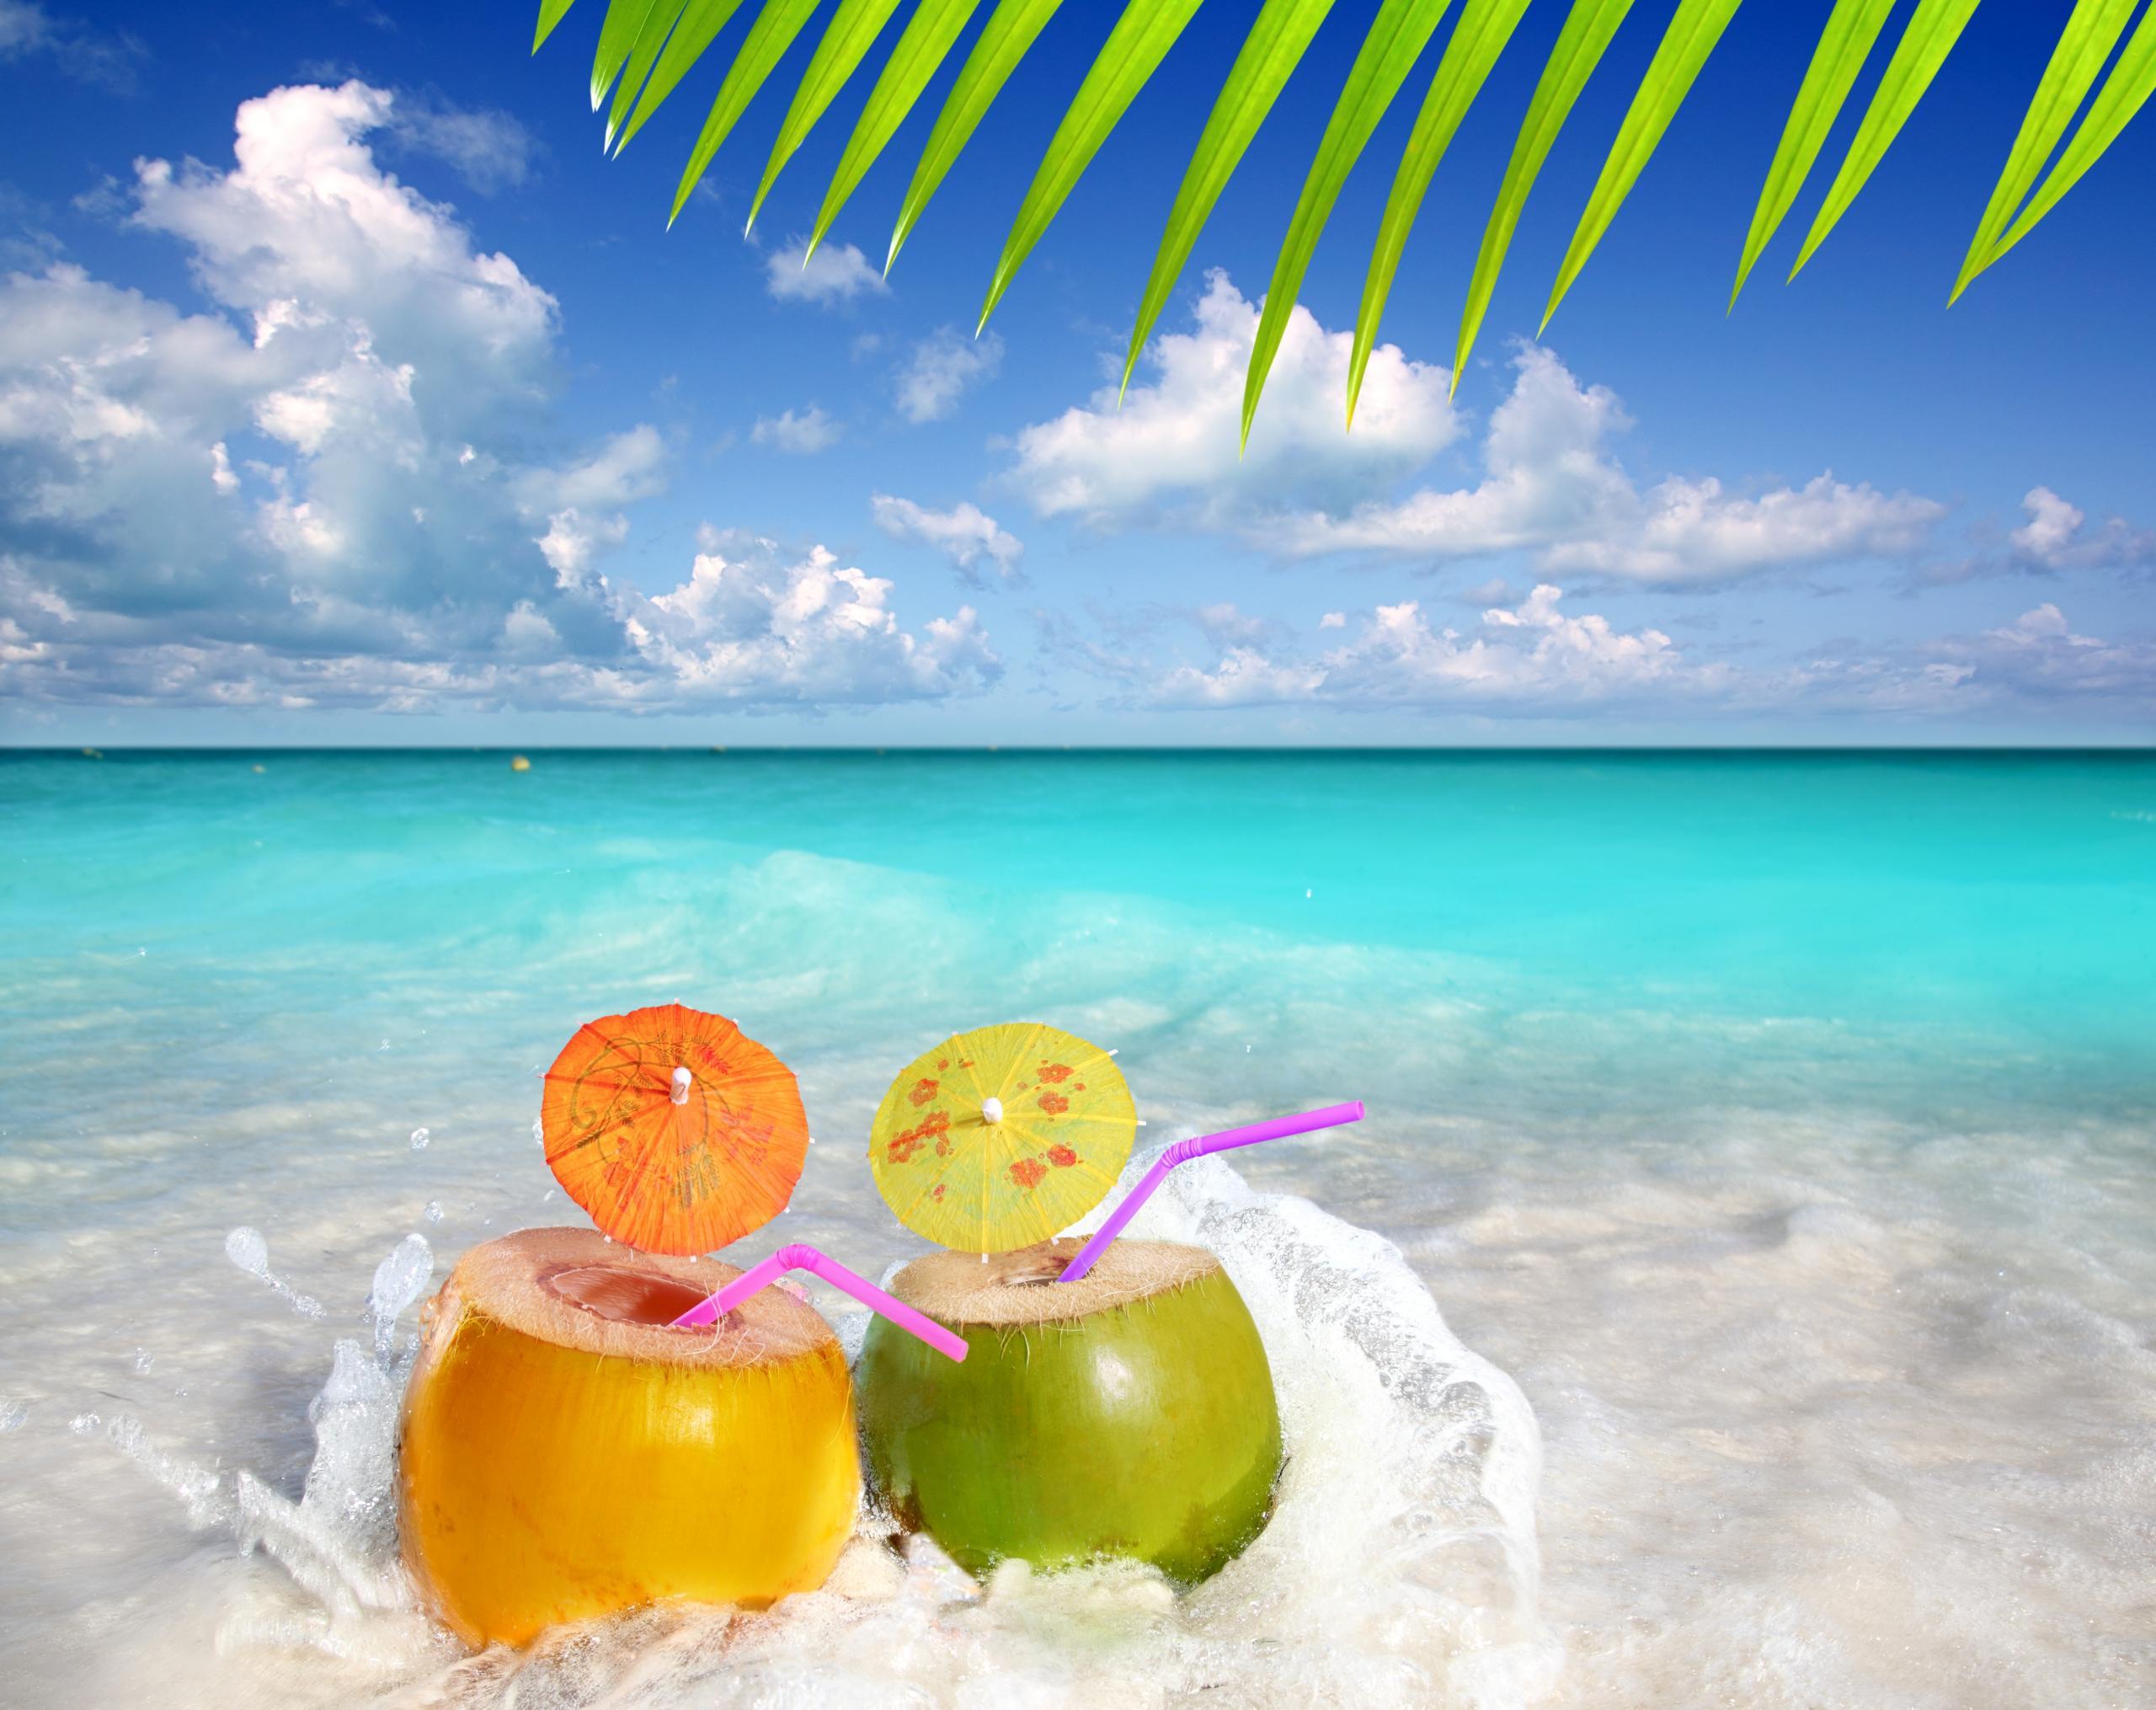 Summer wallpaper examples to put on your desktop background